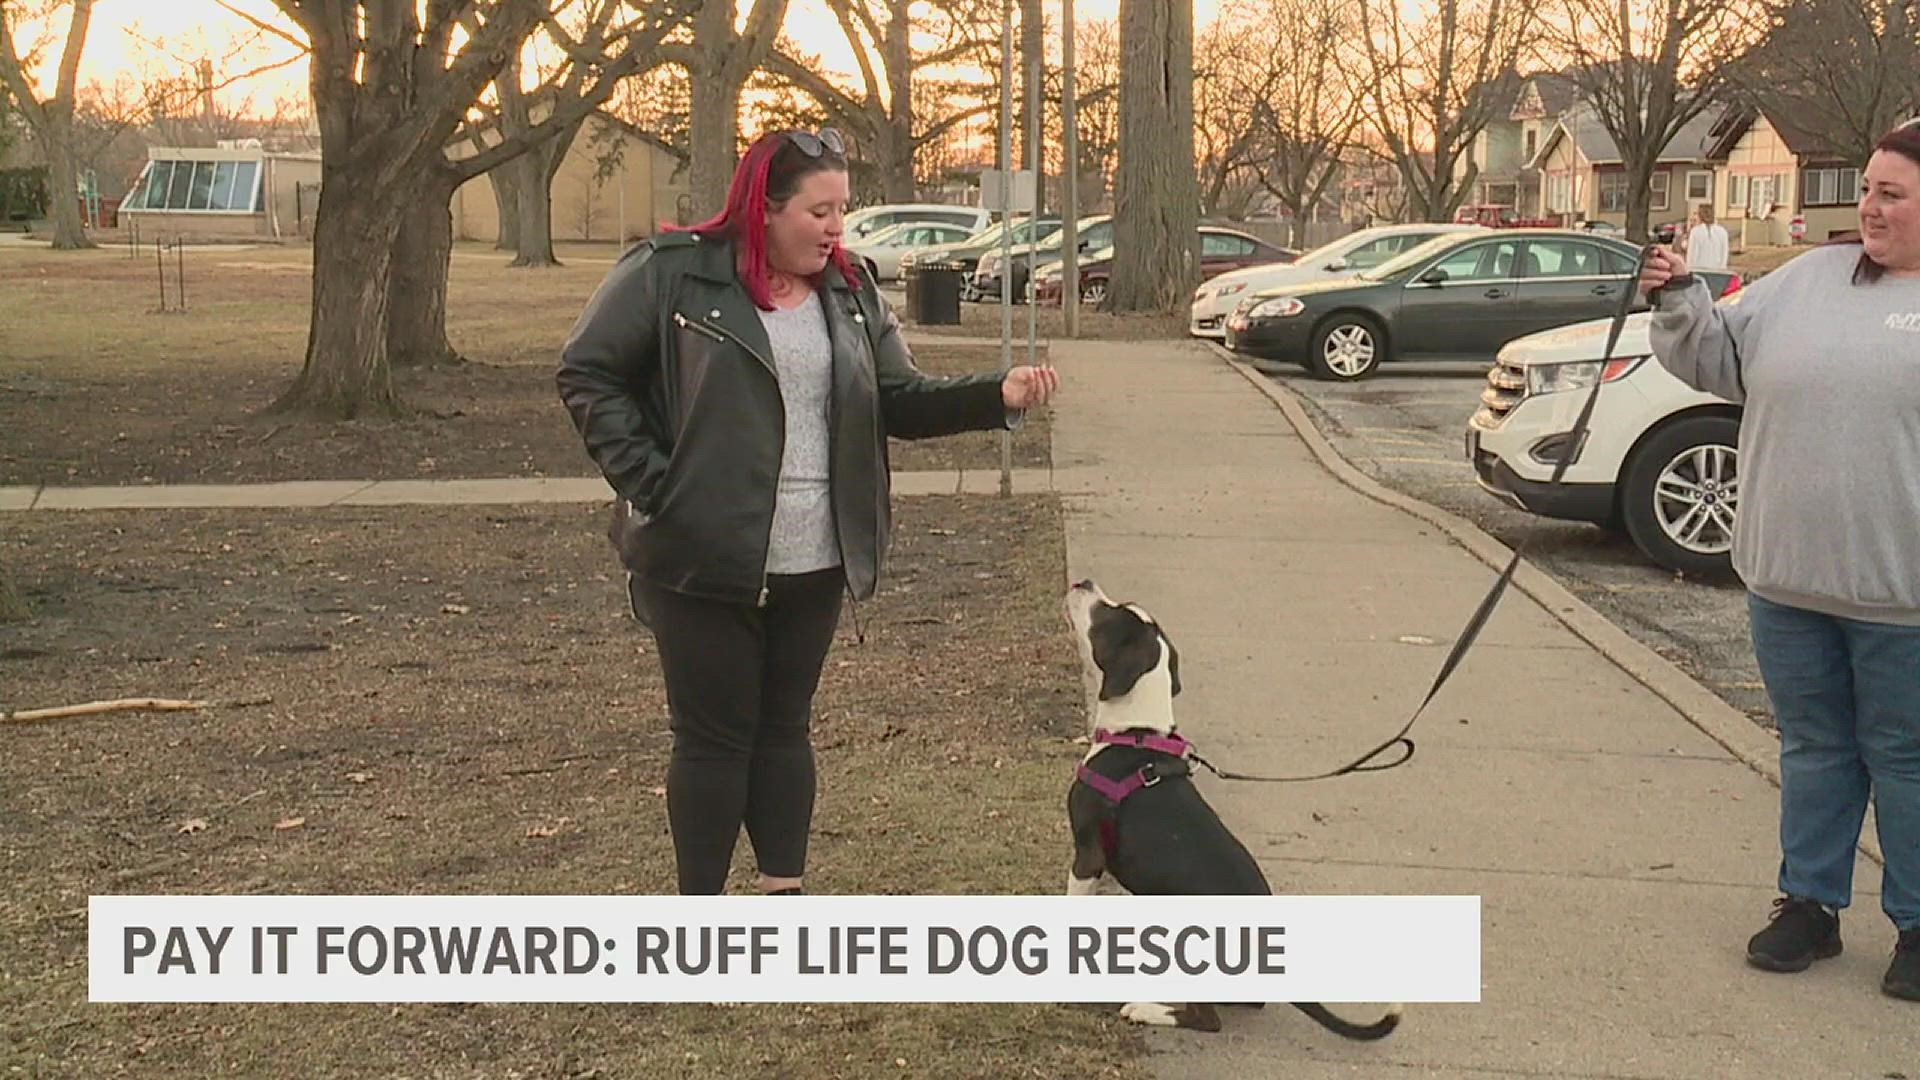 Ruff Life Dog Rescue's goal is to reduce the number of dogs living on the streets or placed in shelters through foster homes.